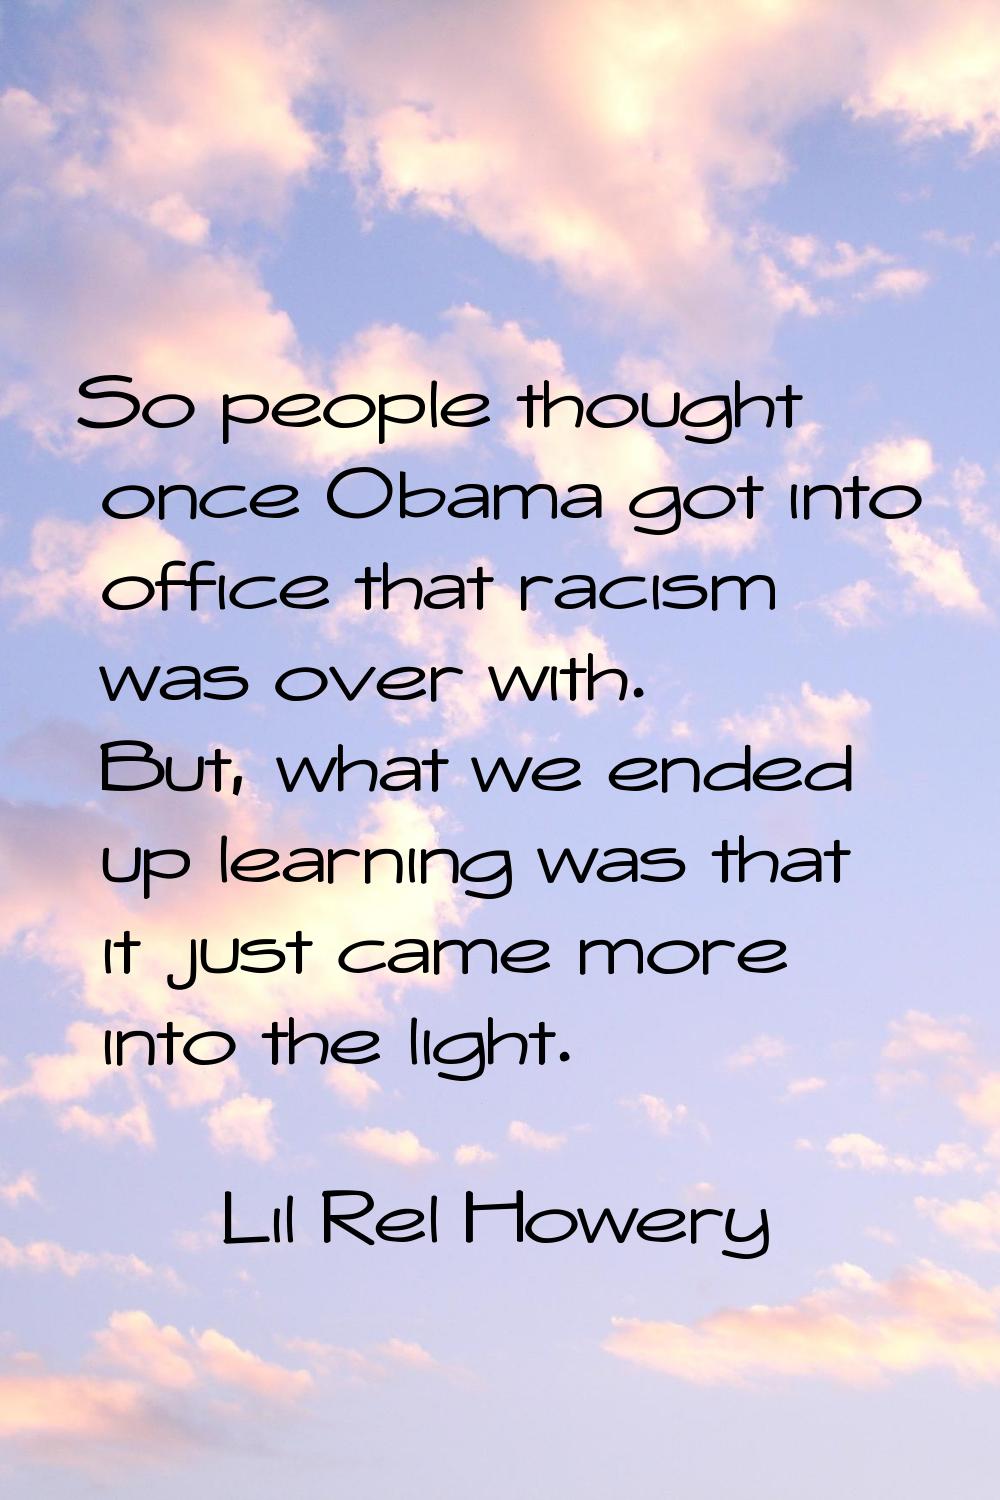 So people thought once Obama got into office that racism was over with. But, what we ended up learn